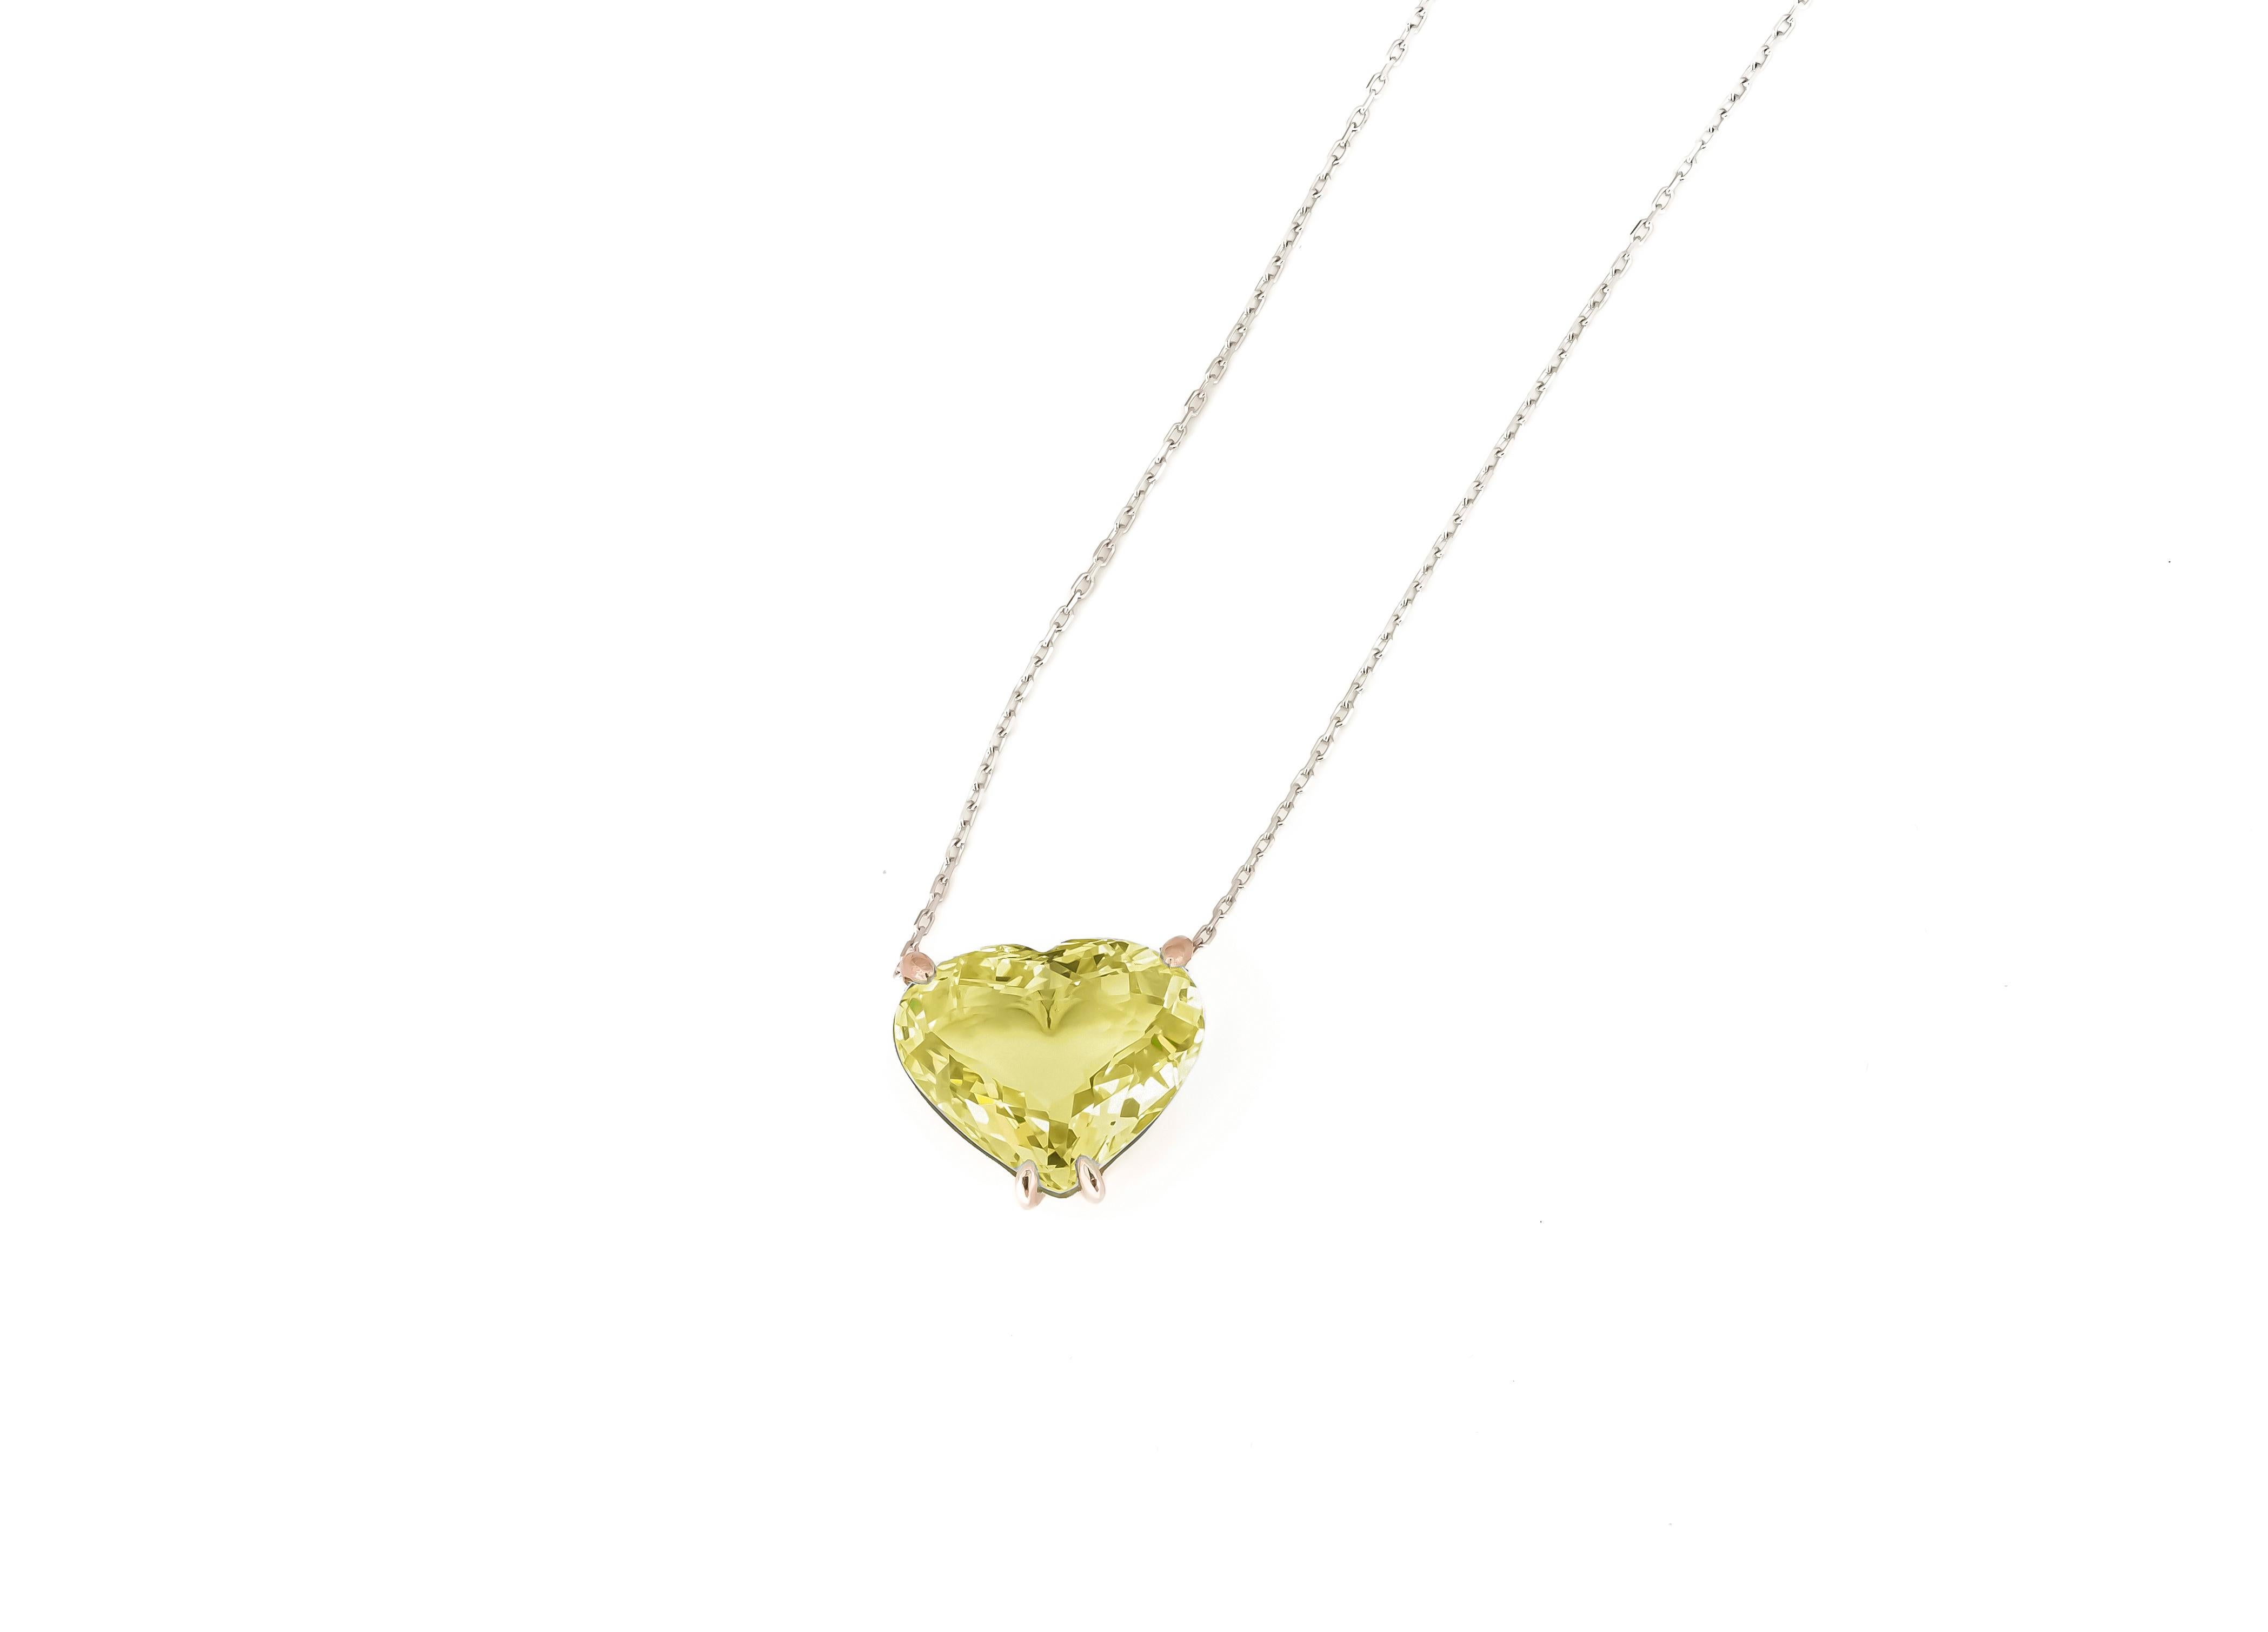 Heart shaped citrine pendant necklace in 14k gold. 

Citrine gold necklace pendant. Heart shape citrine pendant. Genuine citrine pendant. Minimalist citrine Heart Pendant Necklace. Valentines Gifts for Her Jewelry.  

Metal: 14 kt gold
Weight: 3